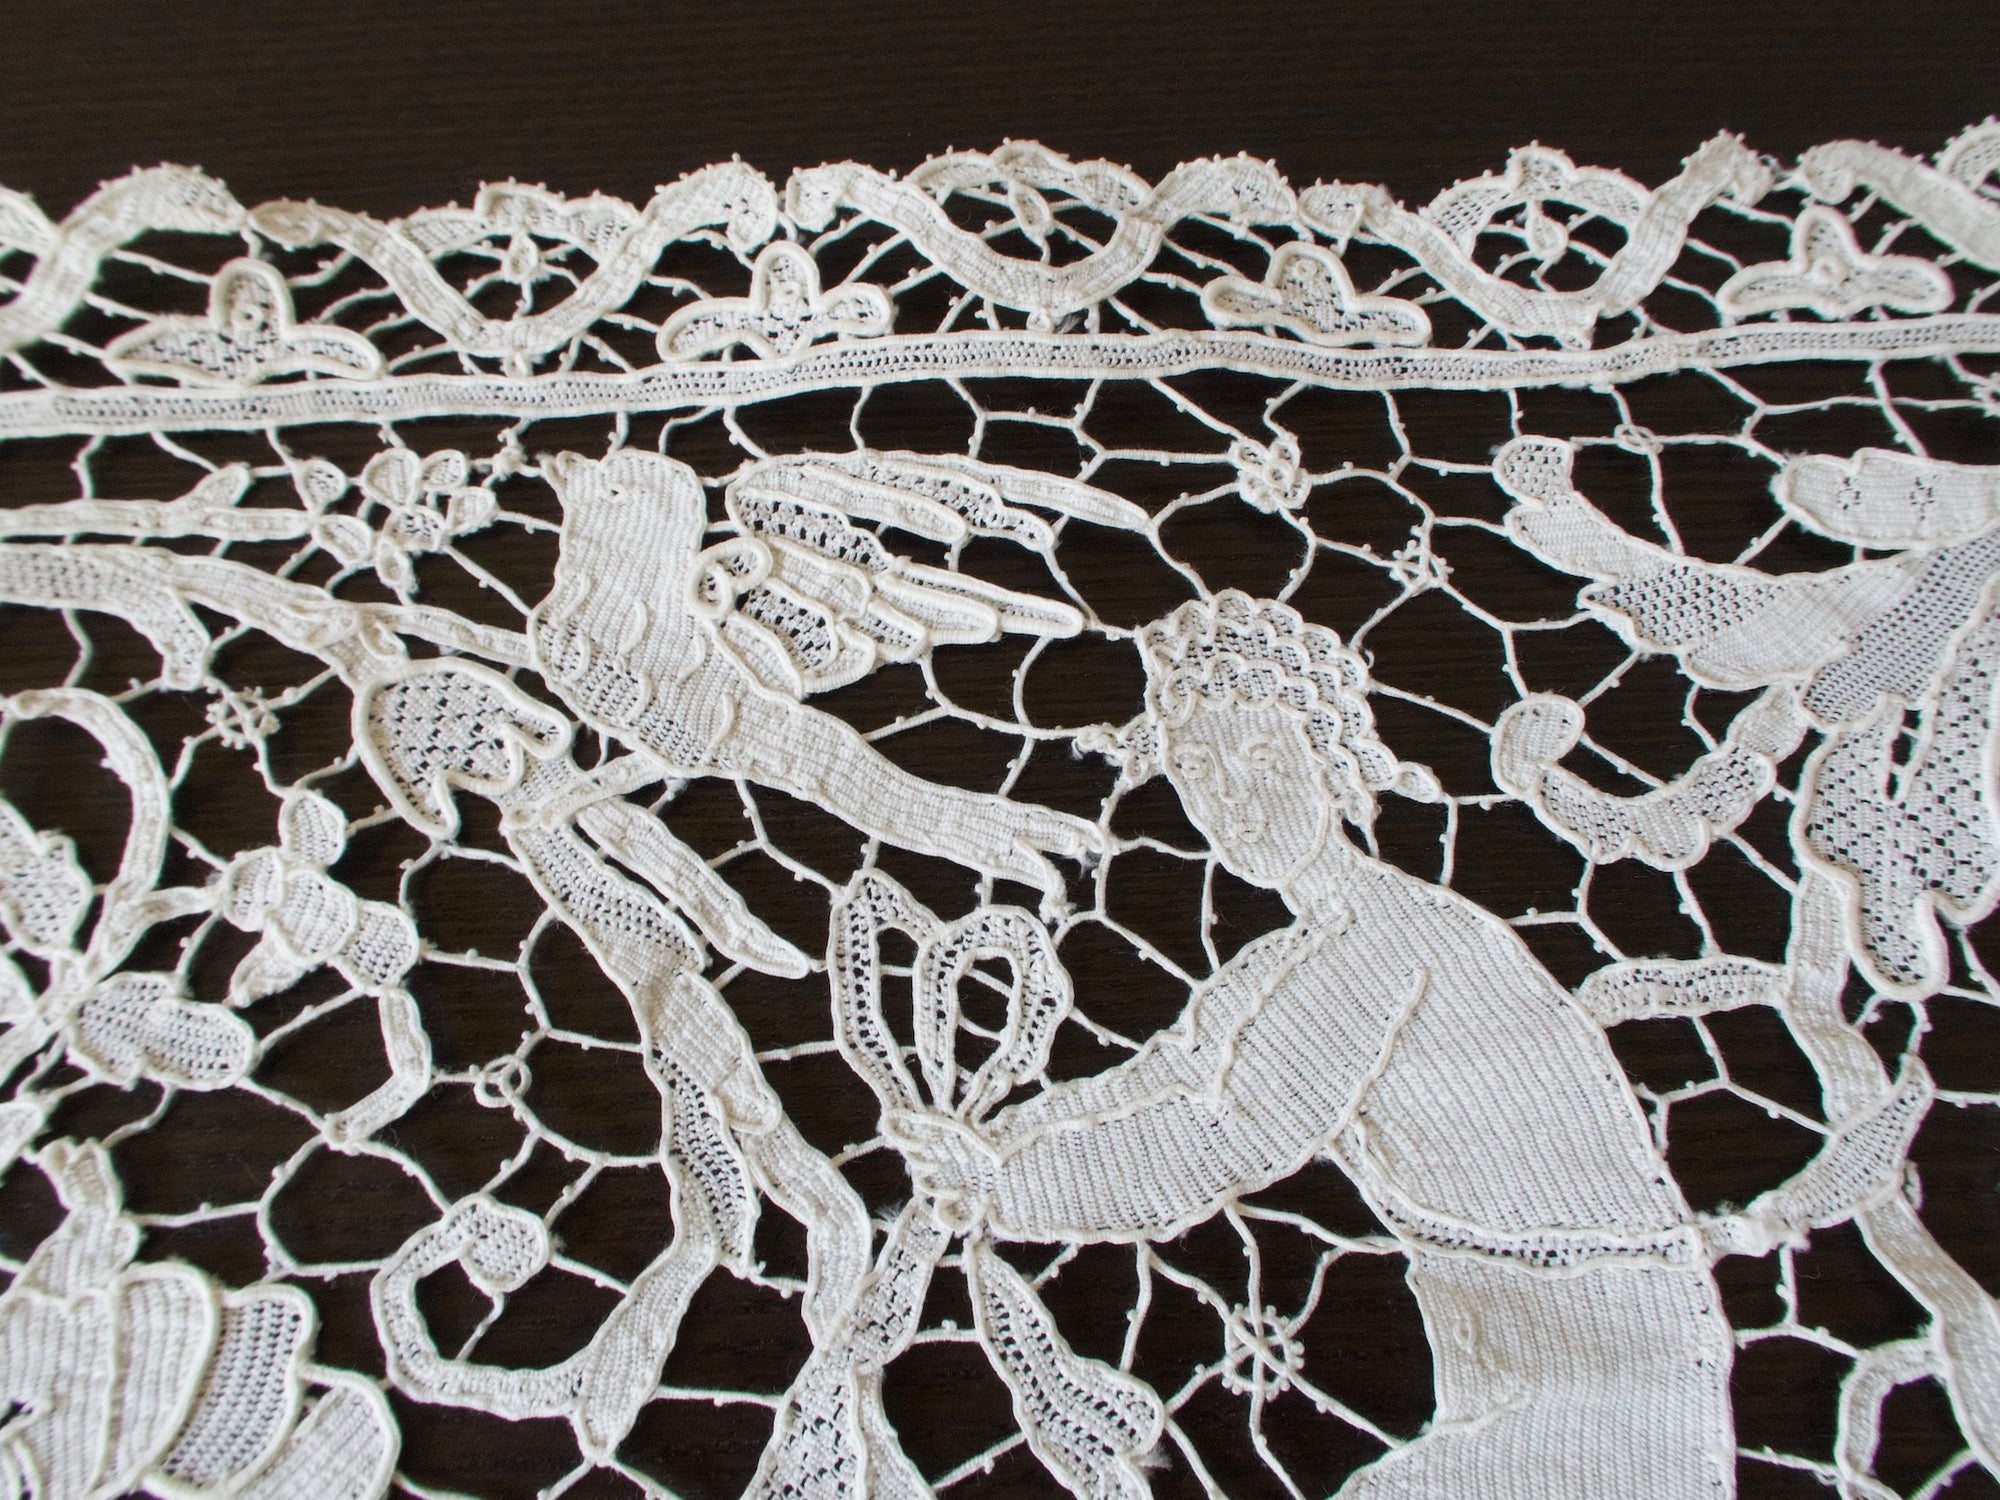 Romantic Vintage French Lace Runner Figural 11x100"